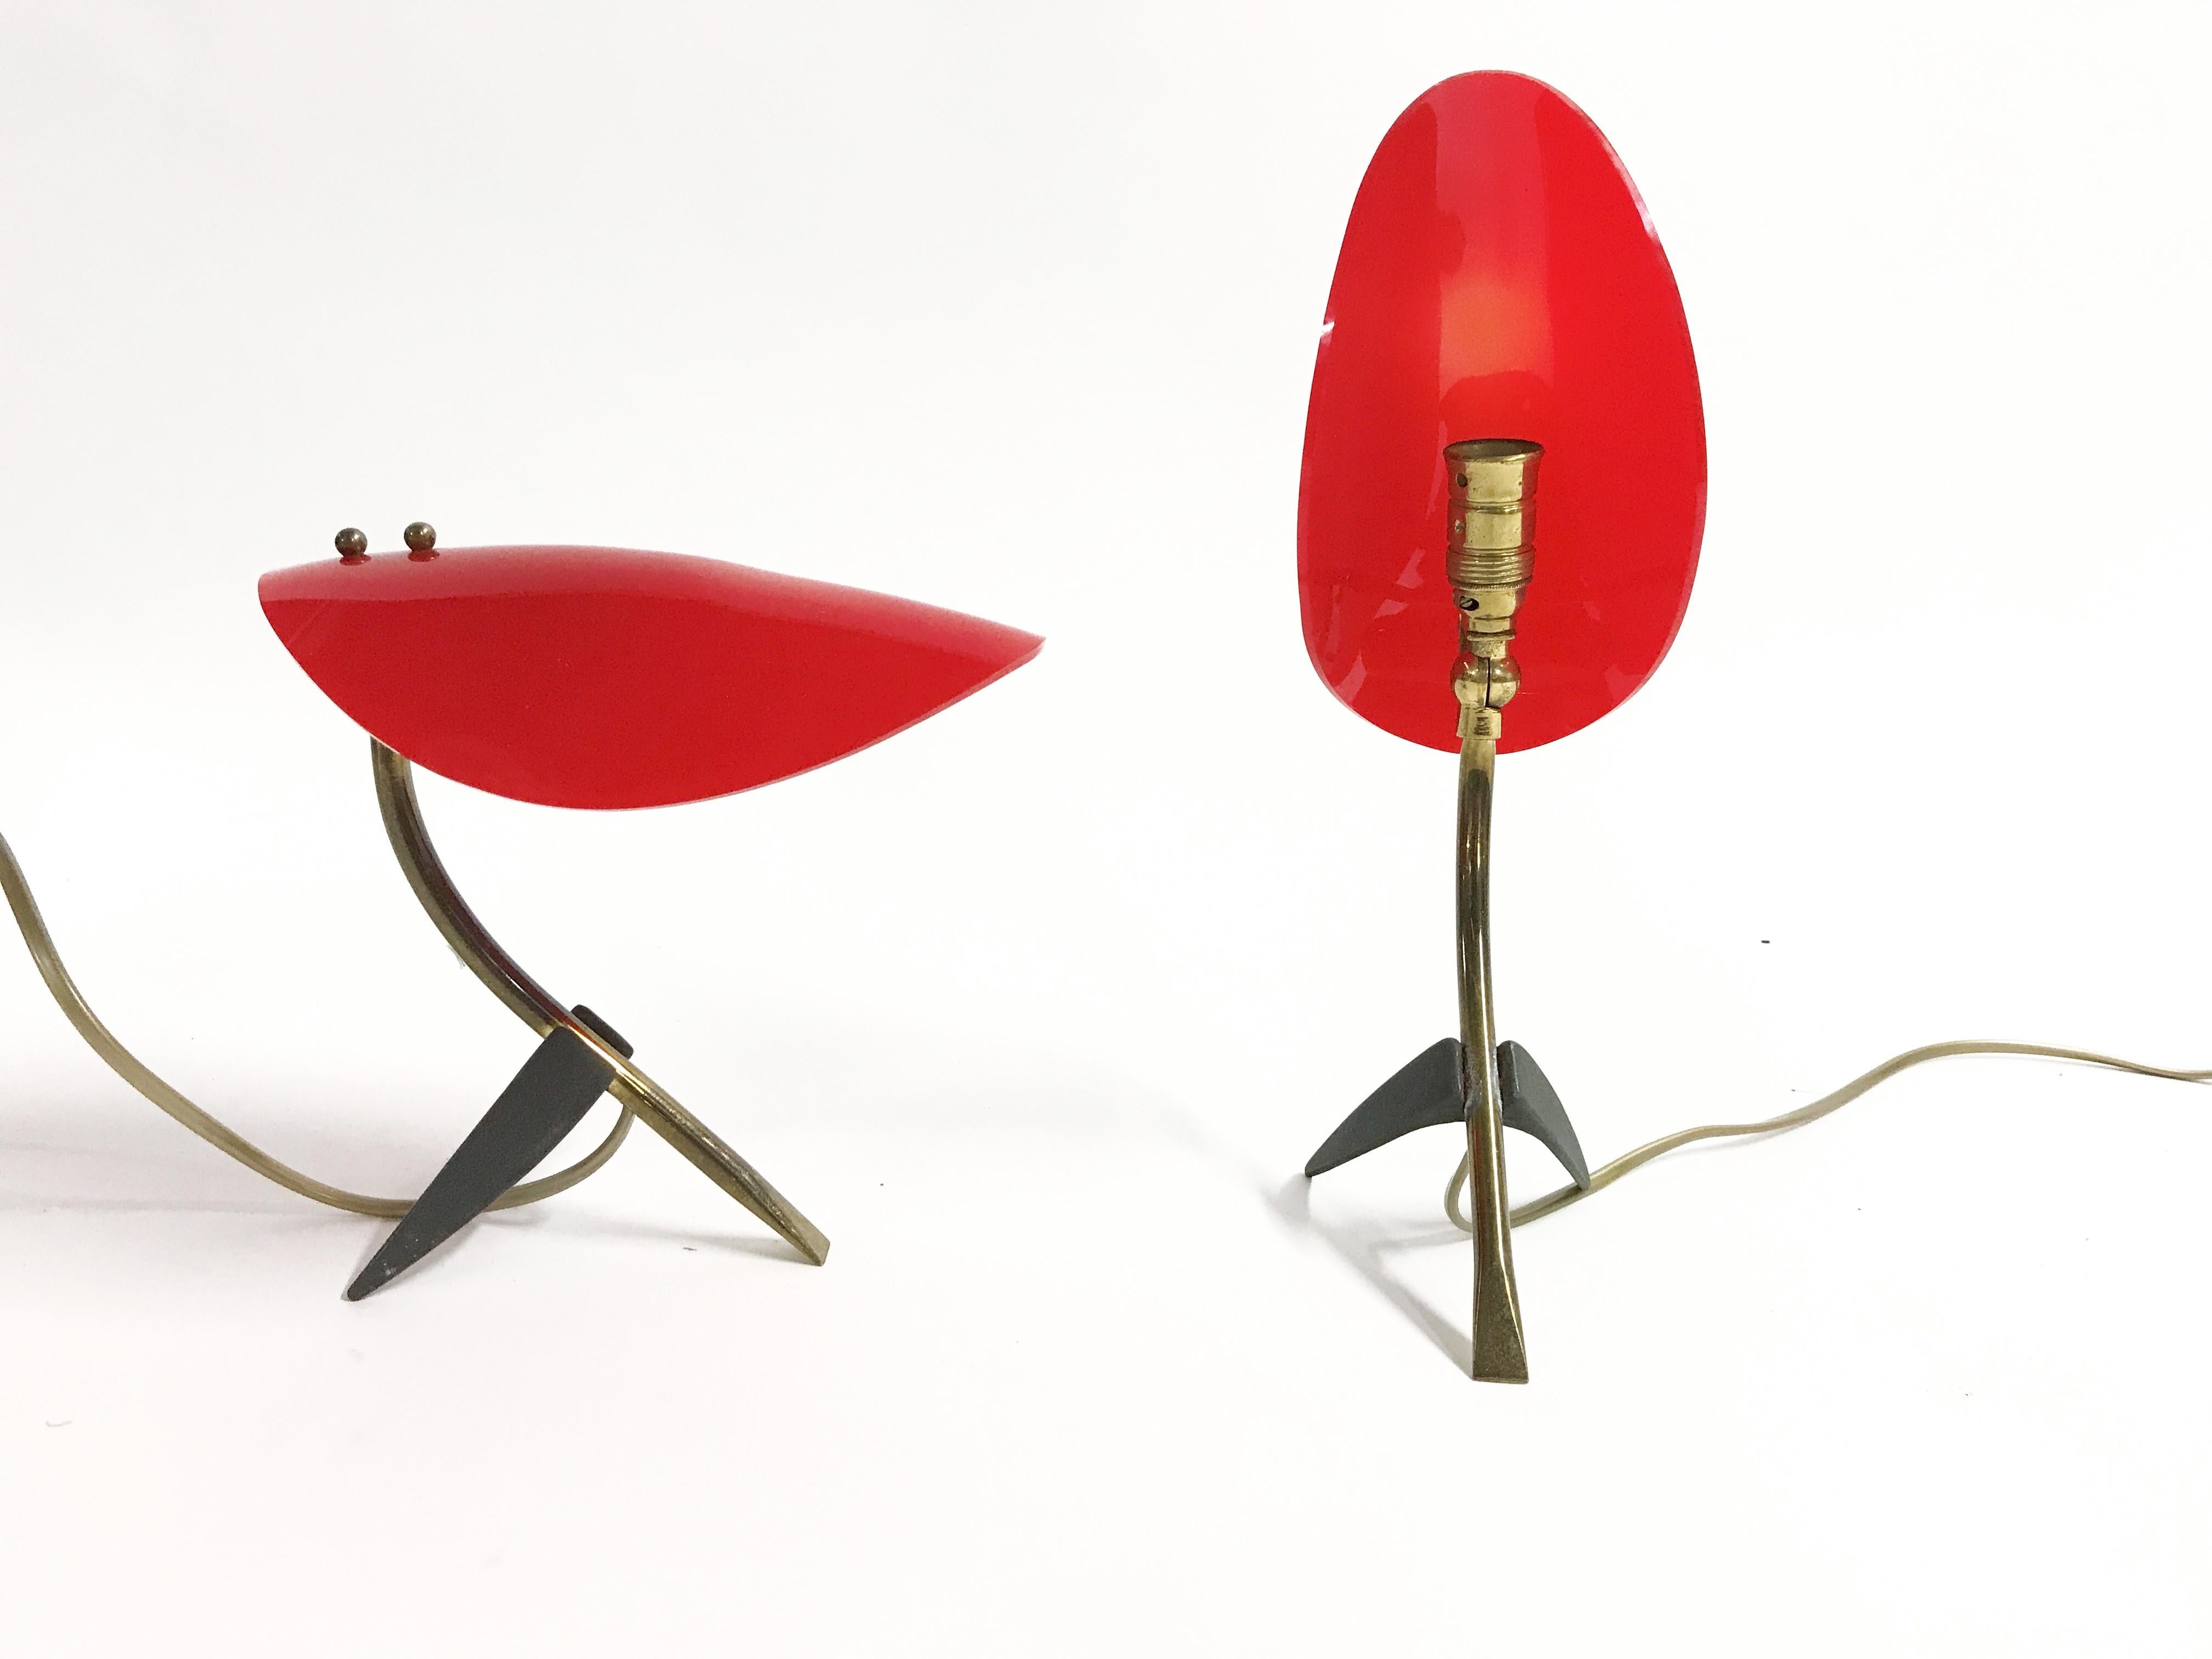 Wonderful pair of italian tripod base table lamps.

The lamps have a brass and black metal base with a red plastic adjustable shade.

Rewired with the original brass bulb holder, tested and ready for use.

The lamps take E14 light